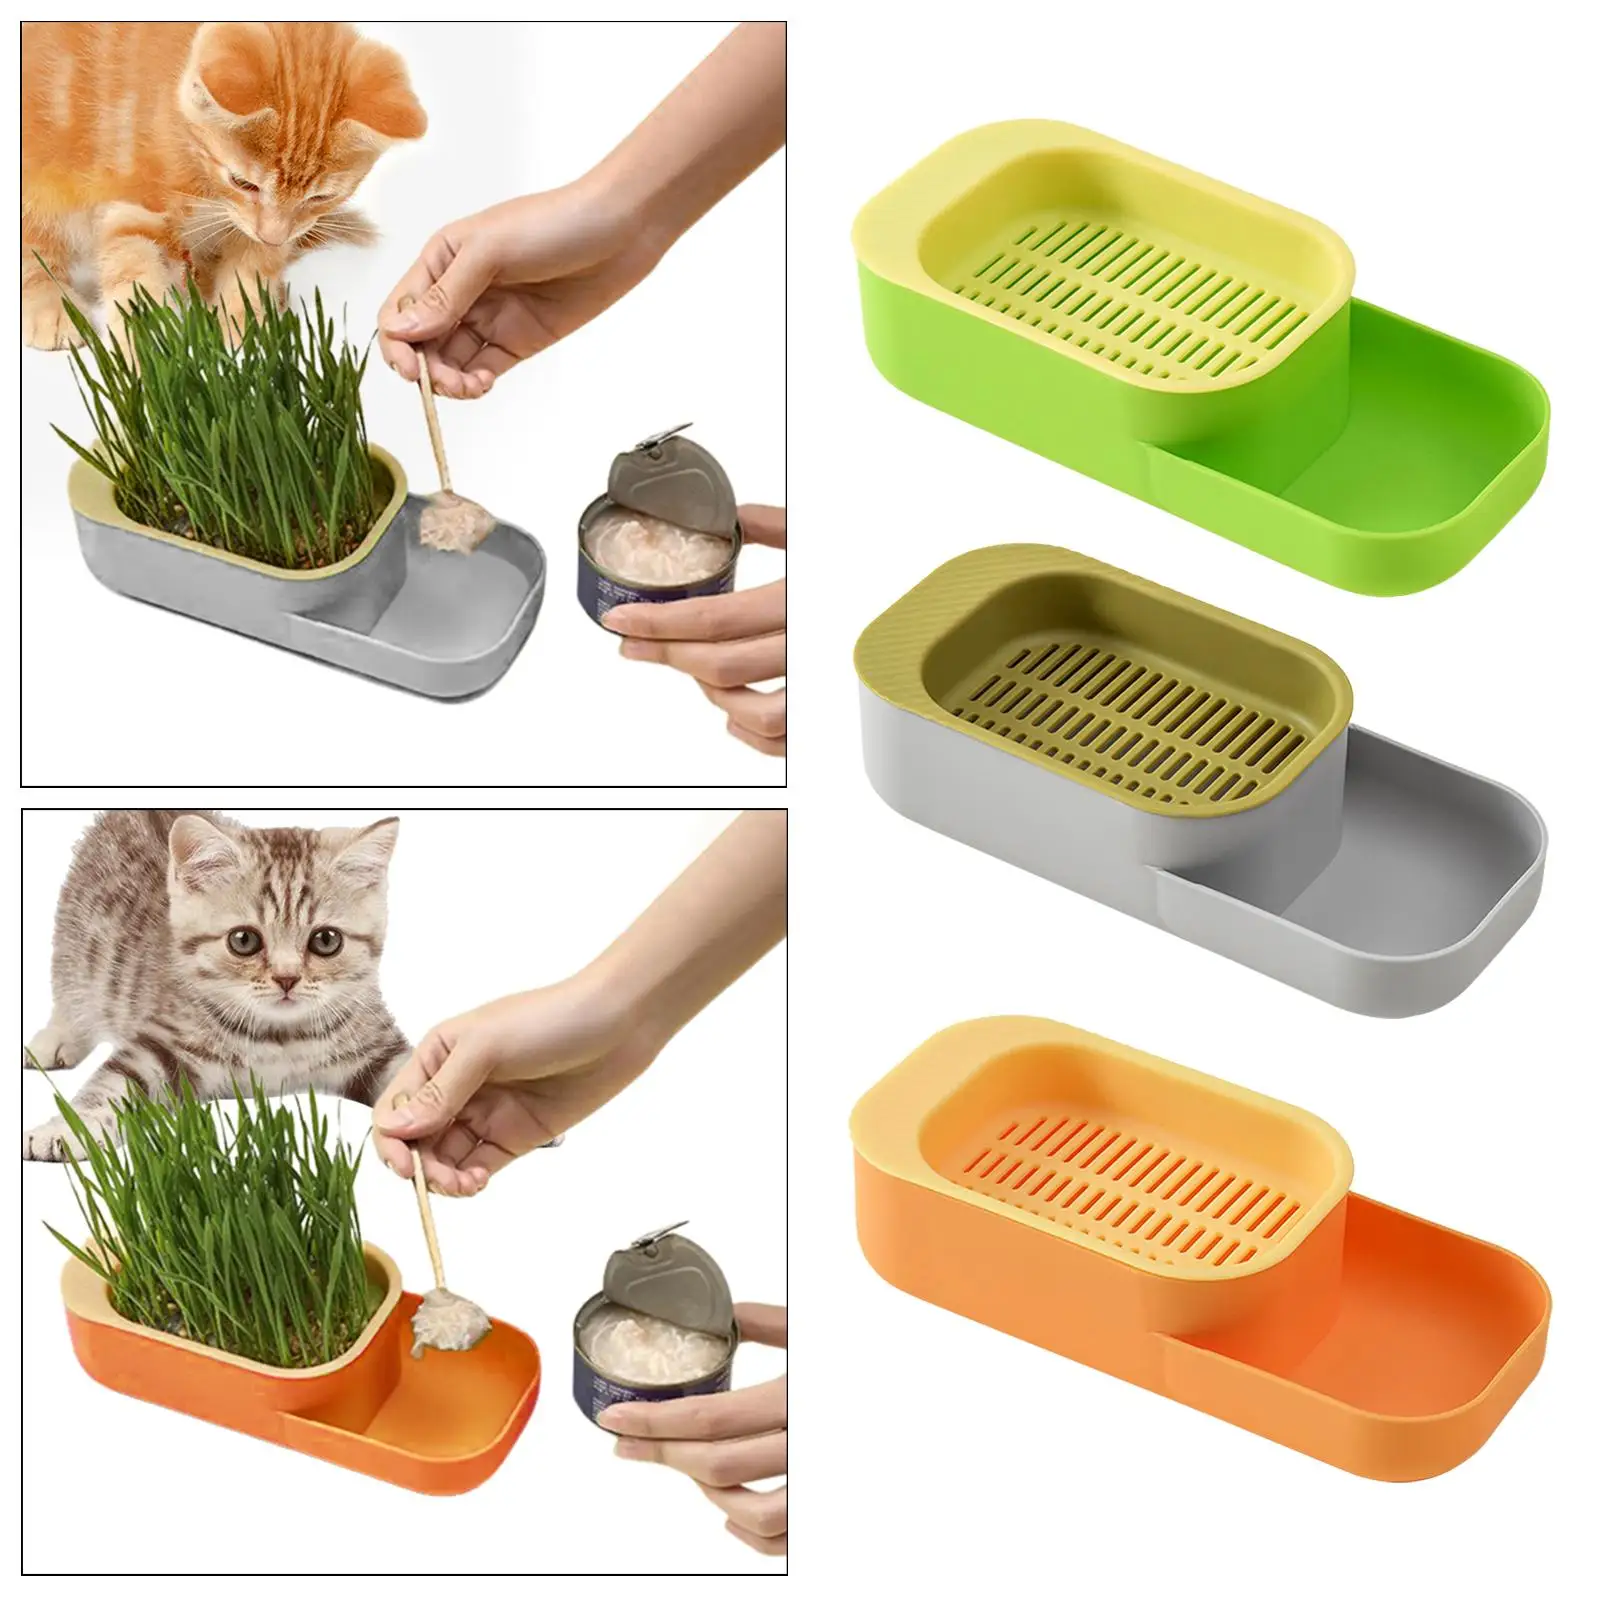 Seed Sprouter Tray Wheatgrass Grower Seed Germination 2 in 1 Hydroponic Cat Grass Box for Microgreens Greenhouse Planting